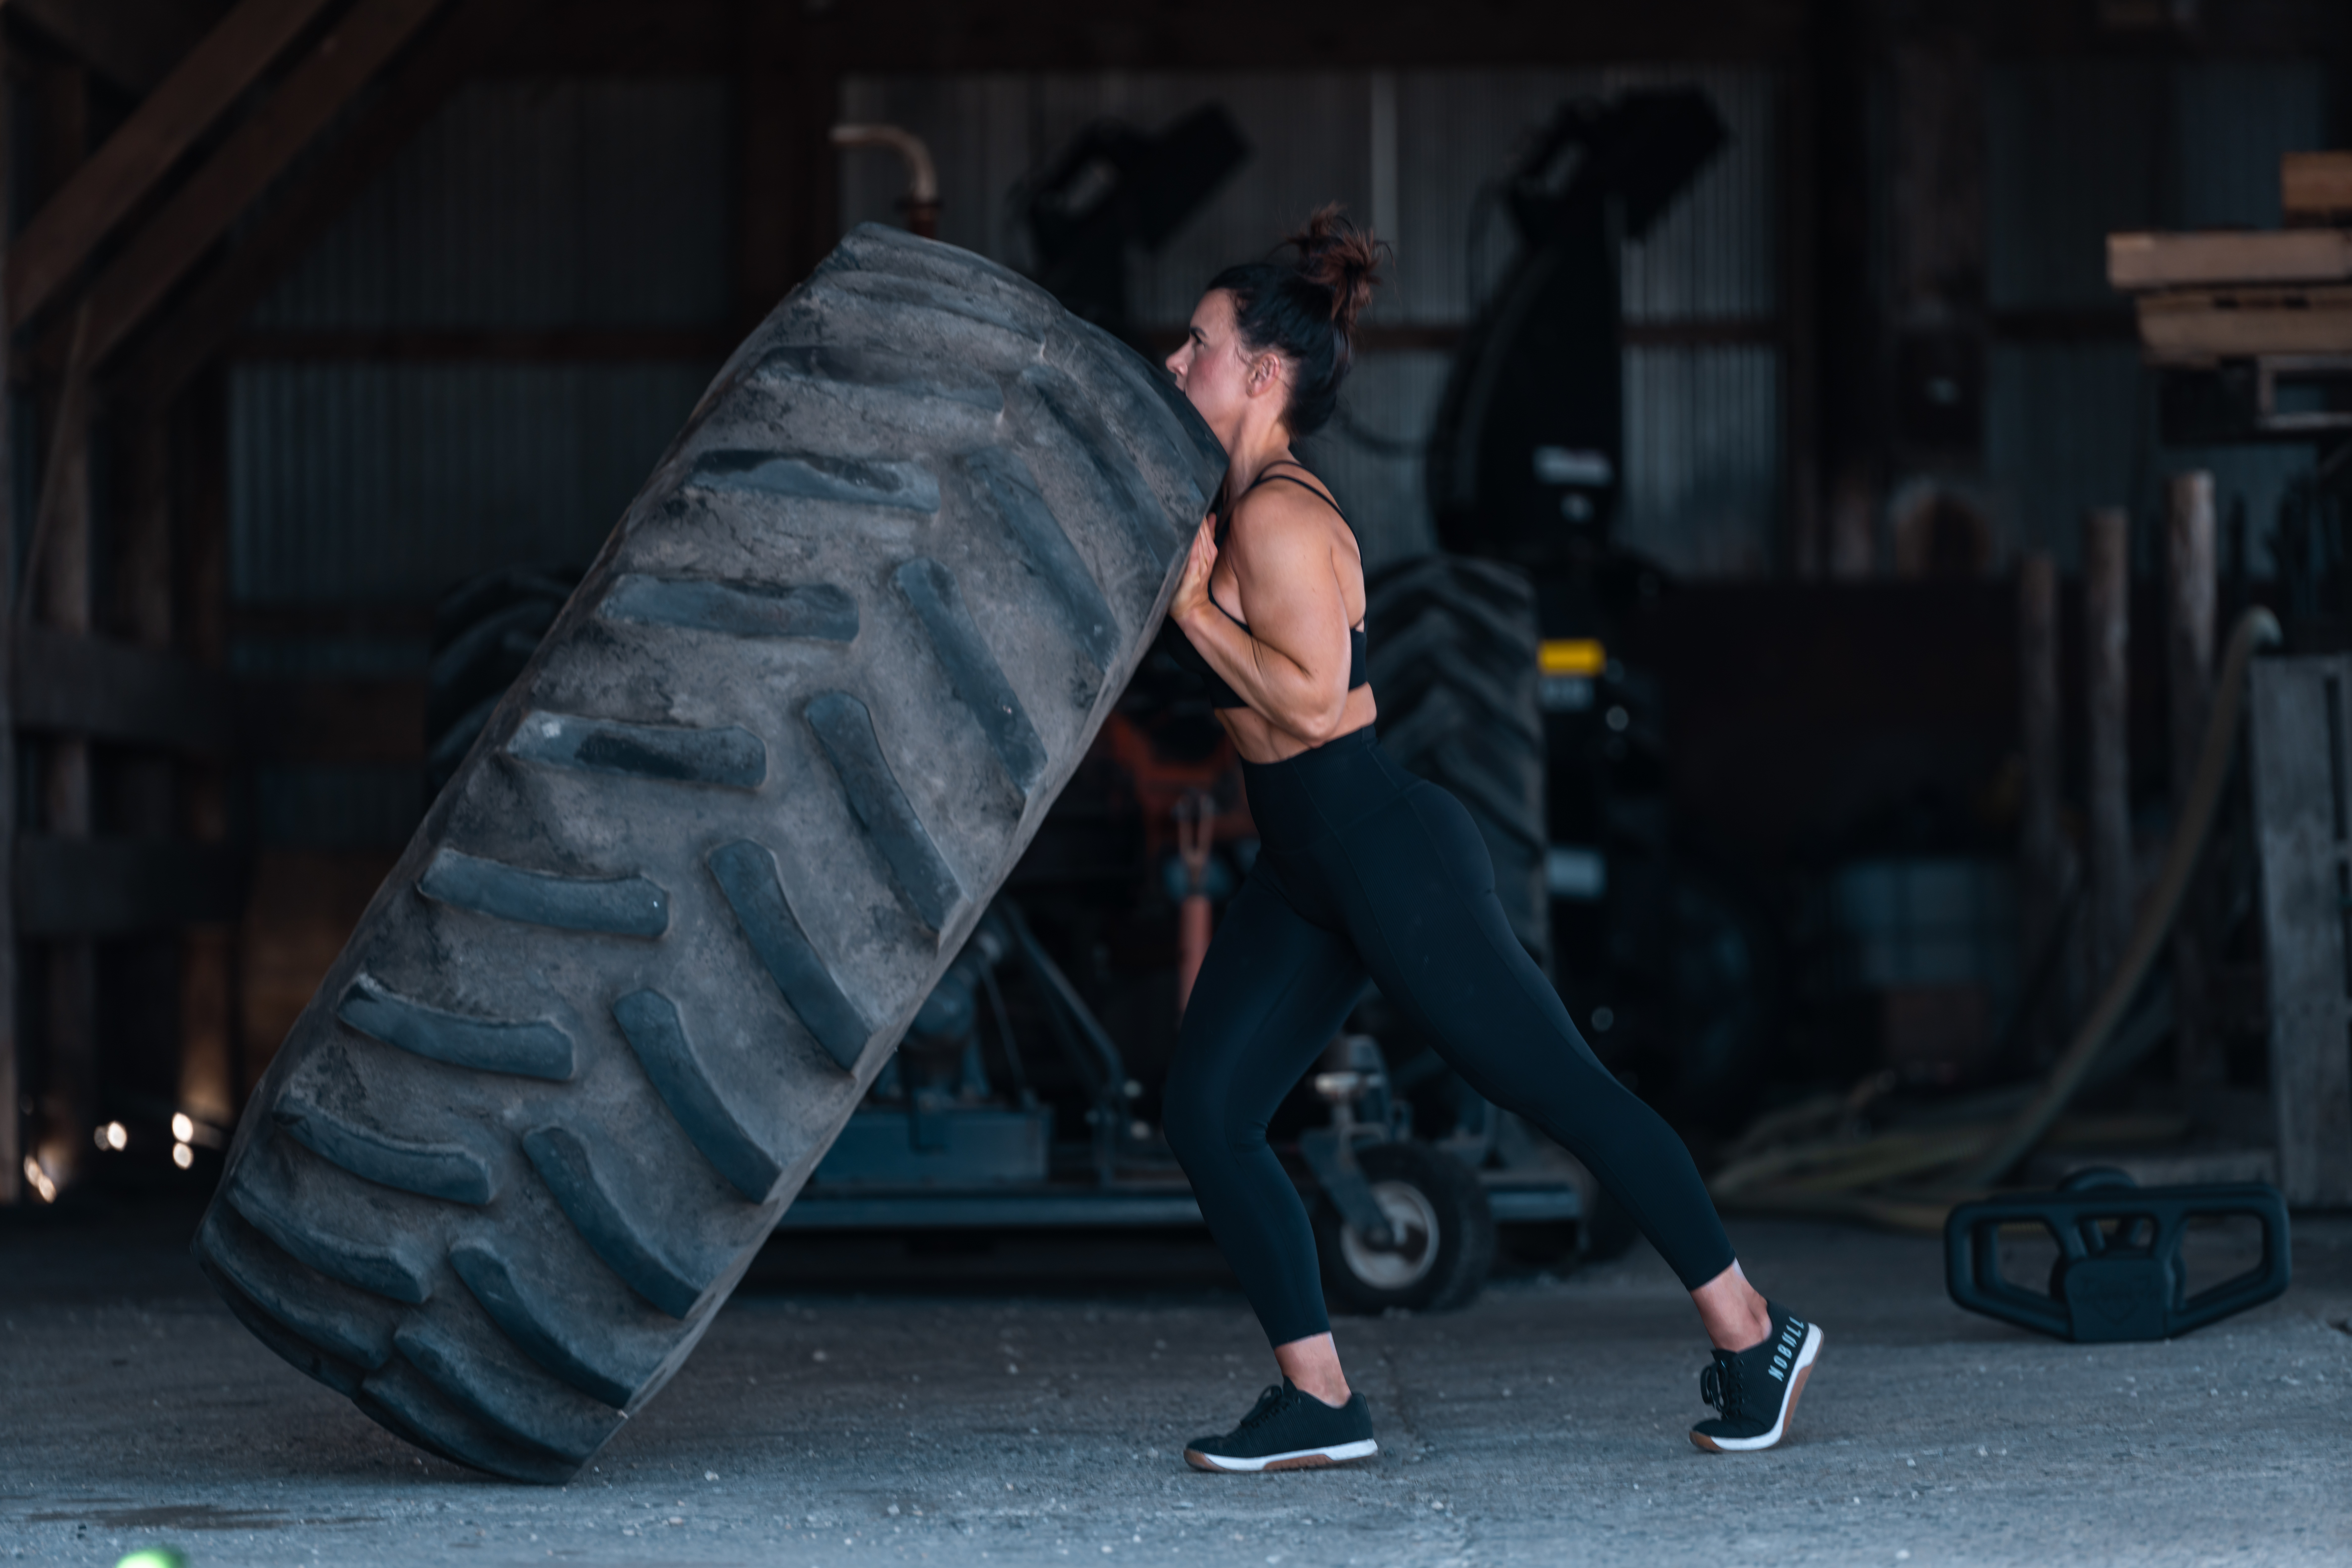 Farm fitness moving tires